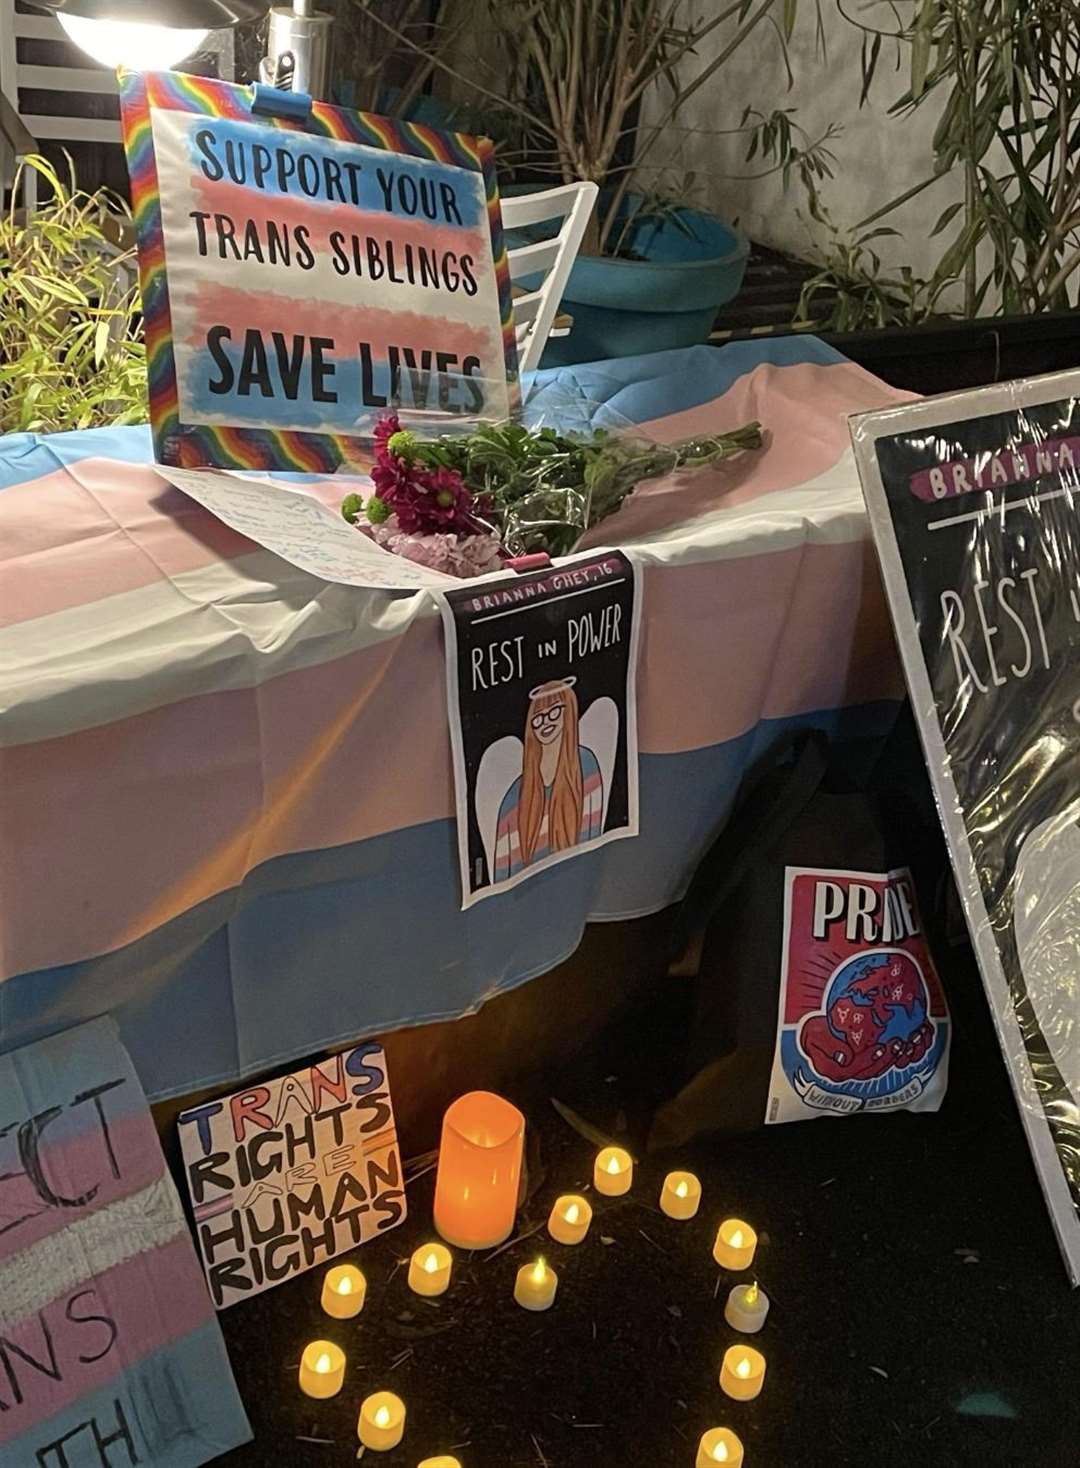 A vigil was held in Chatham to mourn 16-year-old Brianna Ghey, a transgender girl who was stabbed to death in Cheshire. Picture: Shea Coffey (62506455)